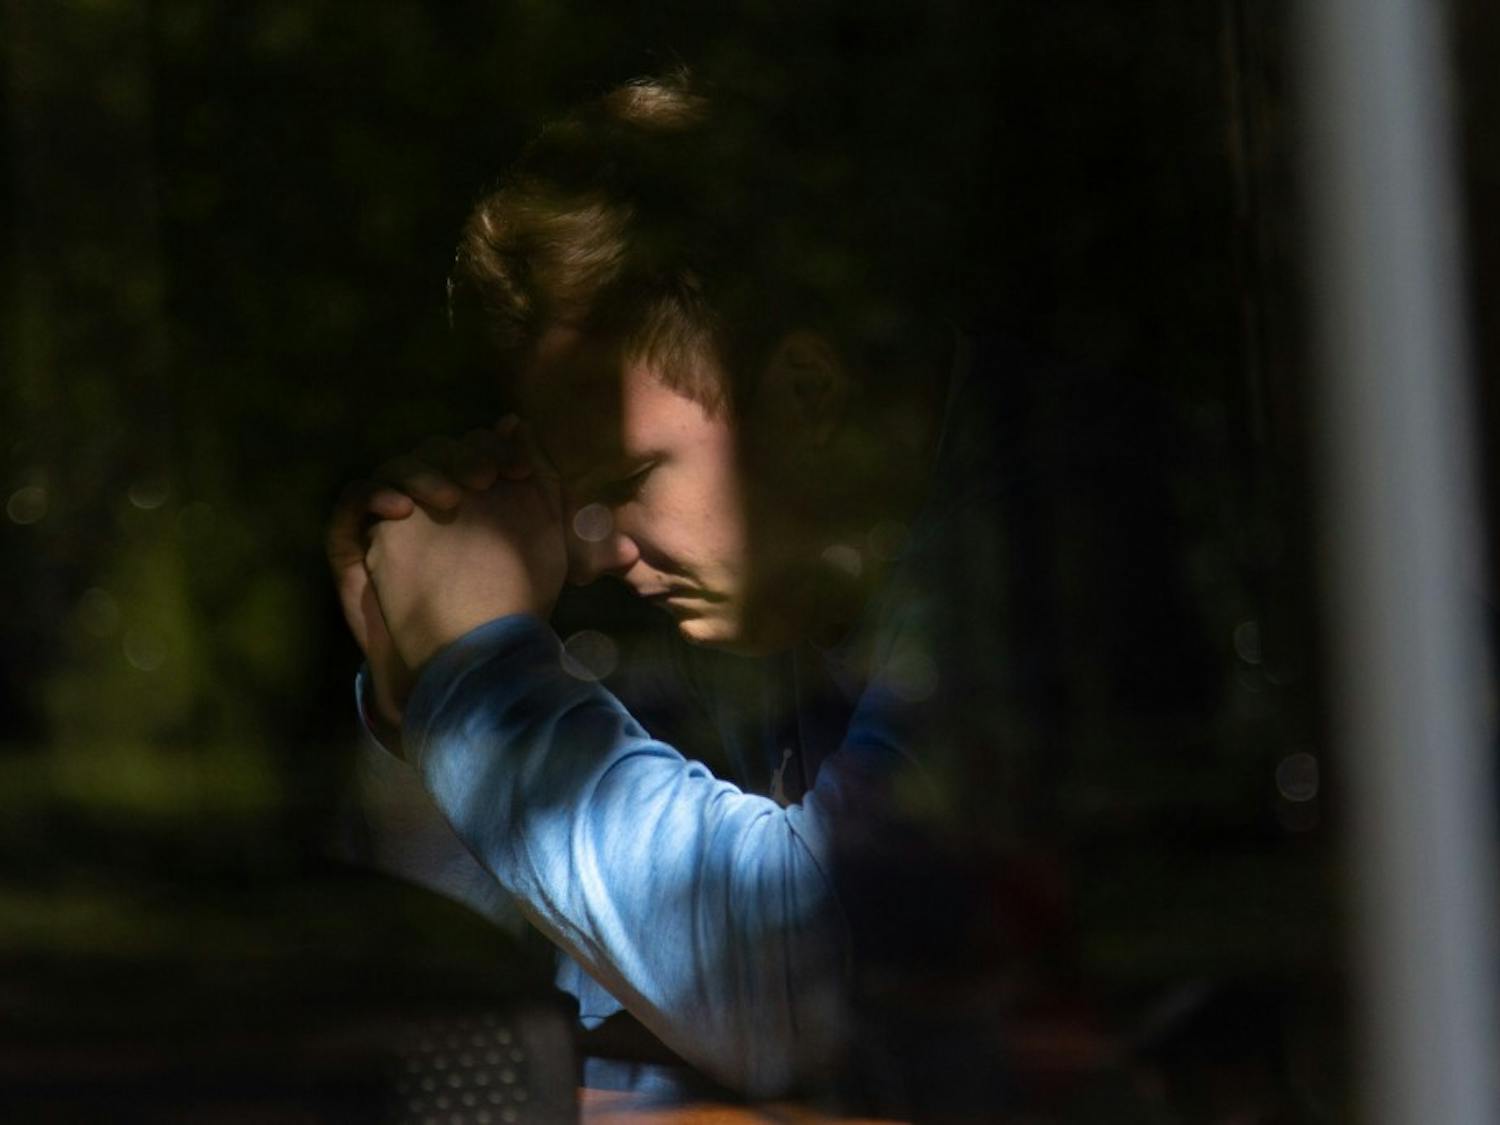 Austin Kliewer, junior exercise and sports science major, prays during UNC week of 24/7 prayer at the North Carolina Study Center, April 16, 2019. UNC week of 24/7 prayer began on April 10 and ends on April 17 and students sign up for timeslots to pray with a stranger. This was Kliewer's first time participating in the event. "Just praying in general for everyone on campus - both believers and non-believers - I think is one of the most powerful things you can do is just talk to the creater of the world, going on their behalf is just amazing," Kliewer said.